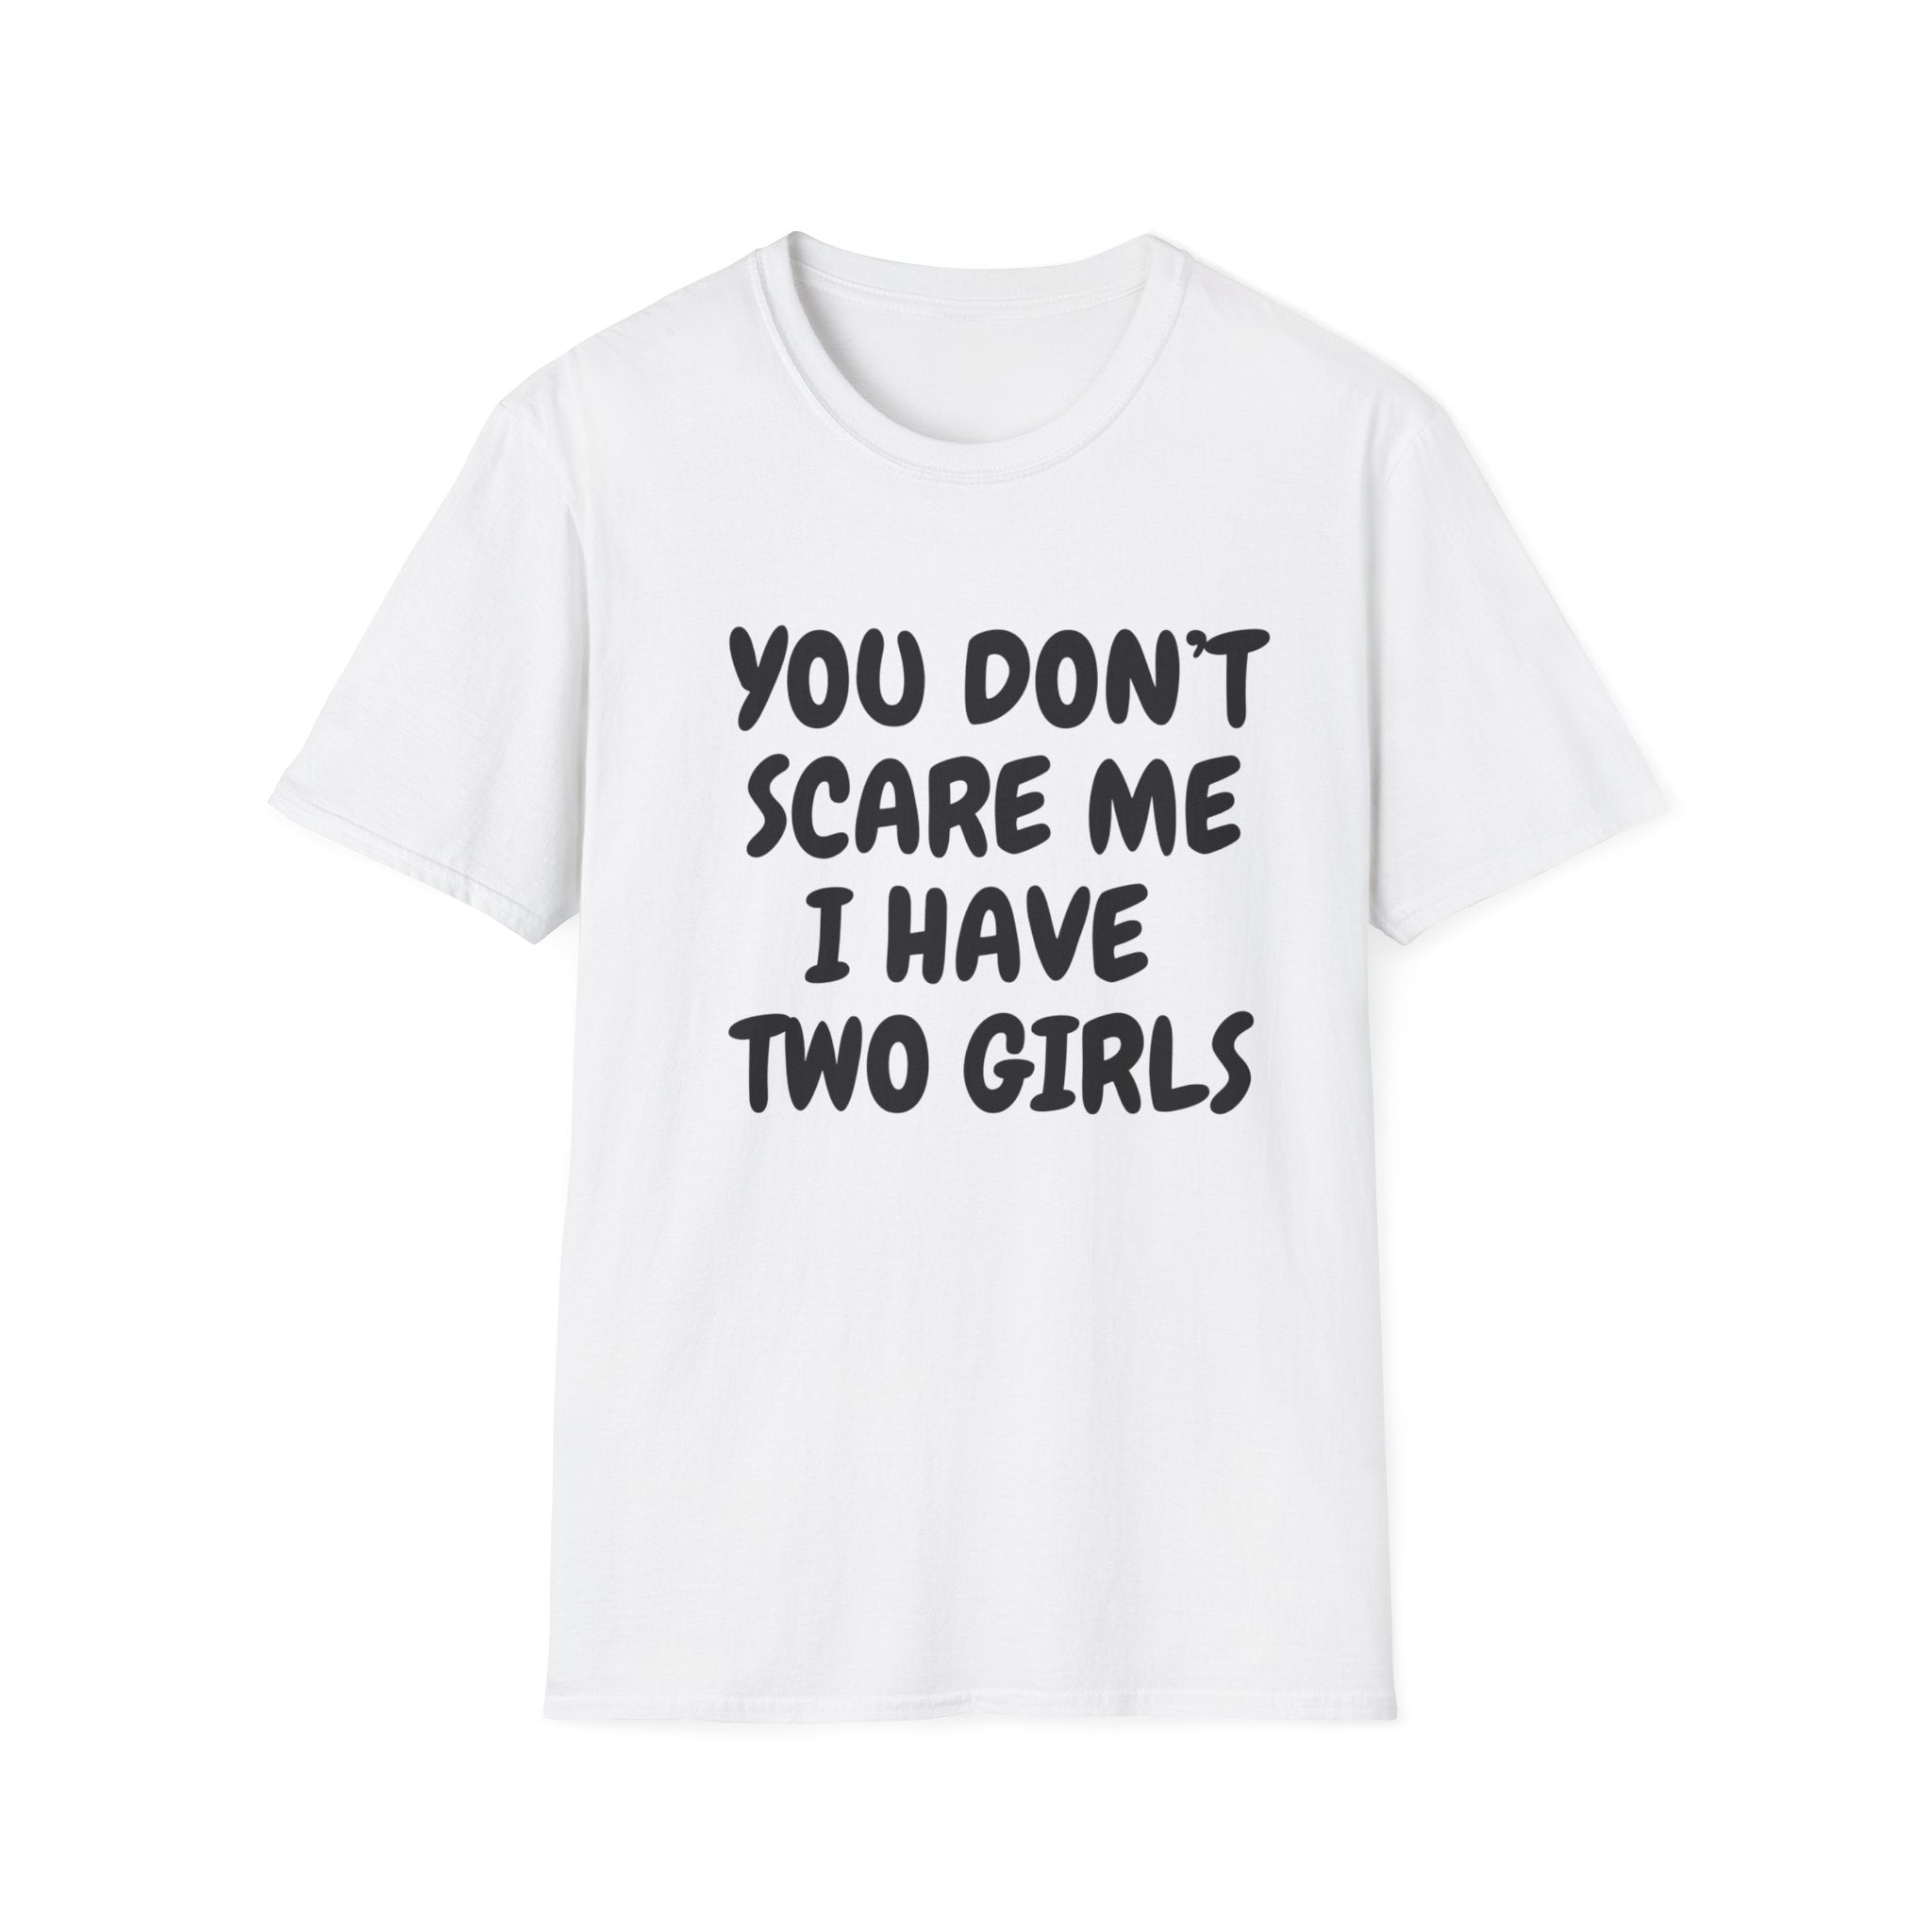 You Don't Scare Me I have Two Girls Funny Dad T-shirt, Father's Day Gift, Gift for Dad, Dad Shirt, Men's T-shirt